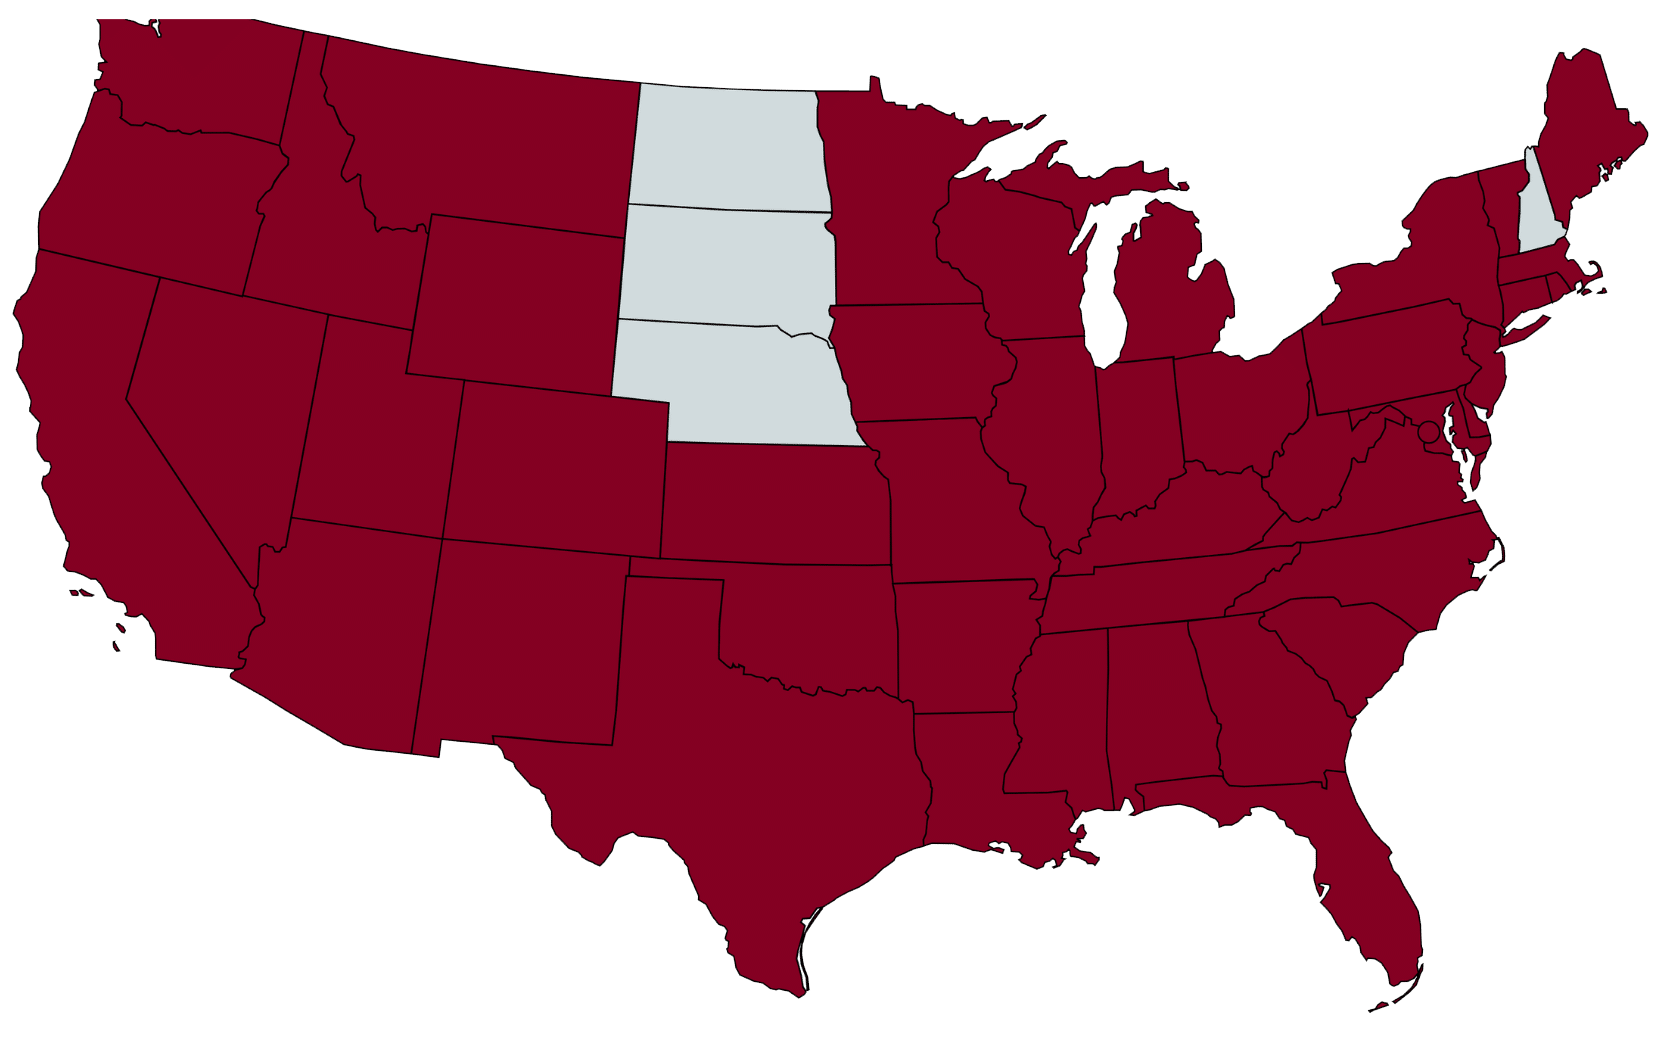 The only states in which we do not have clients are Alaska, Hawaii, Nebraska, New Hampshire, North Dakota, and South Dakota